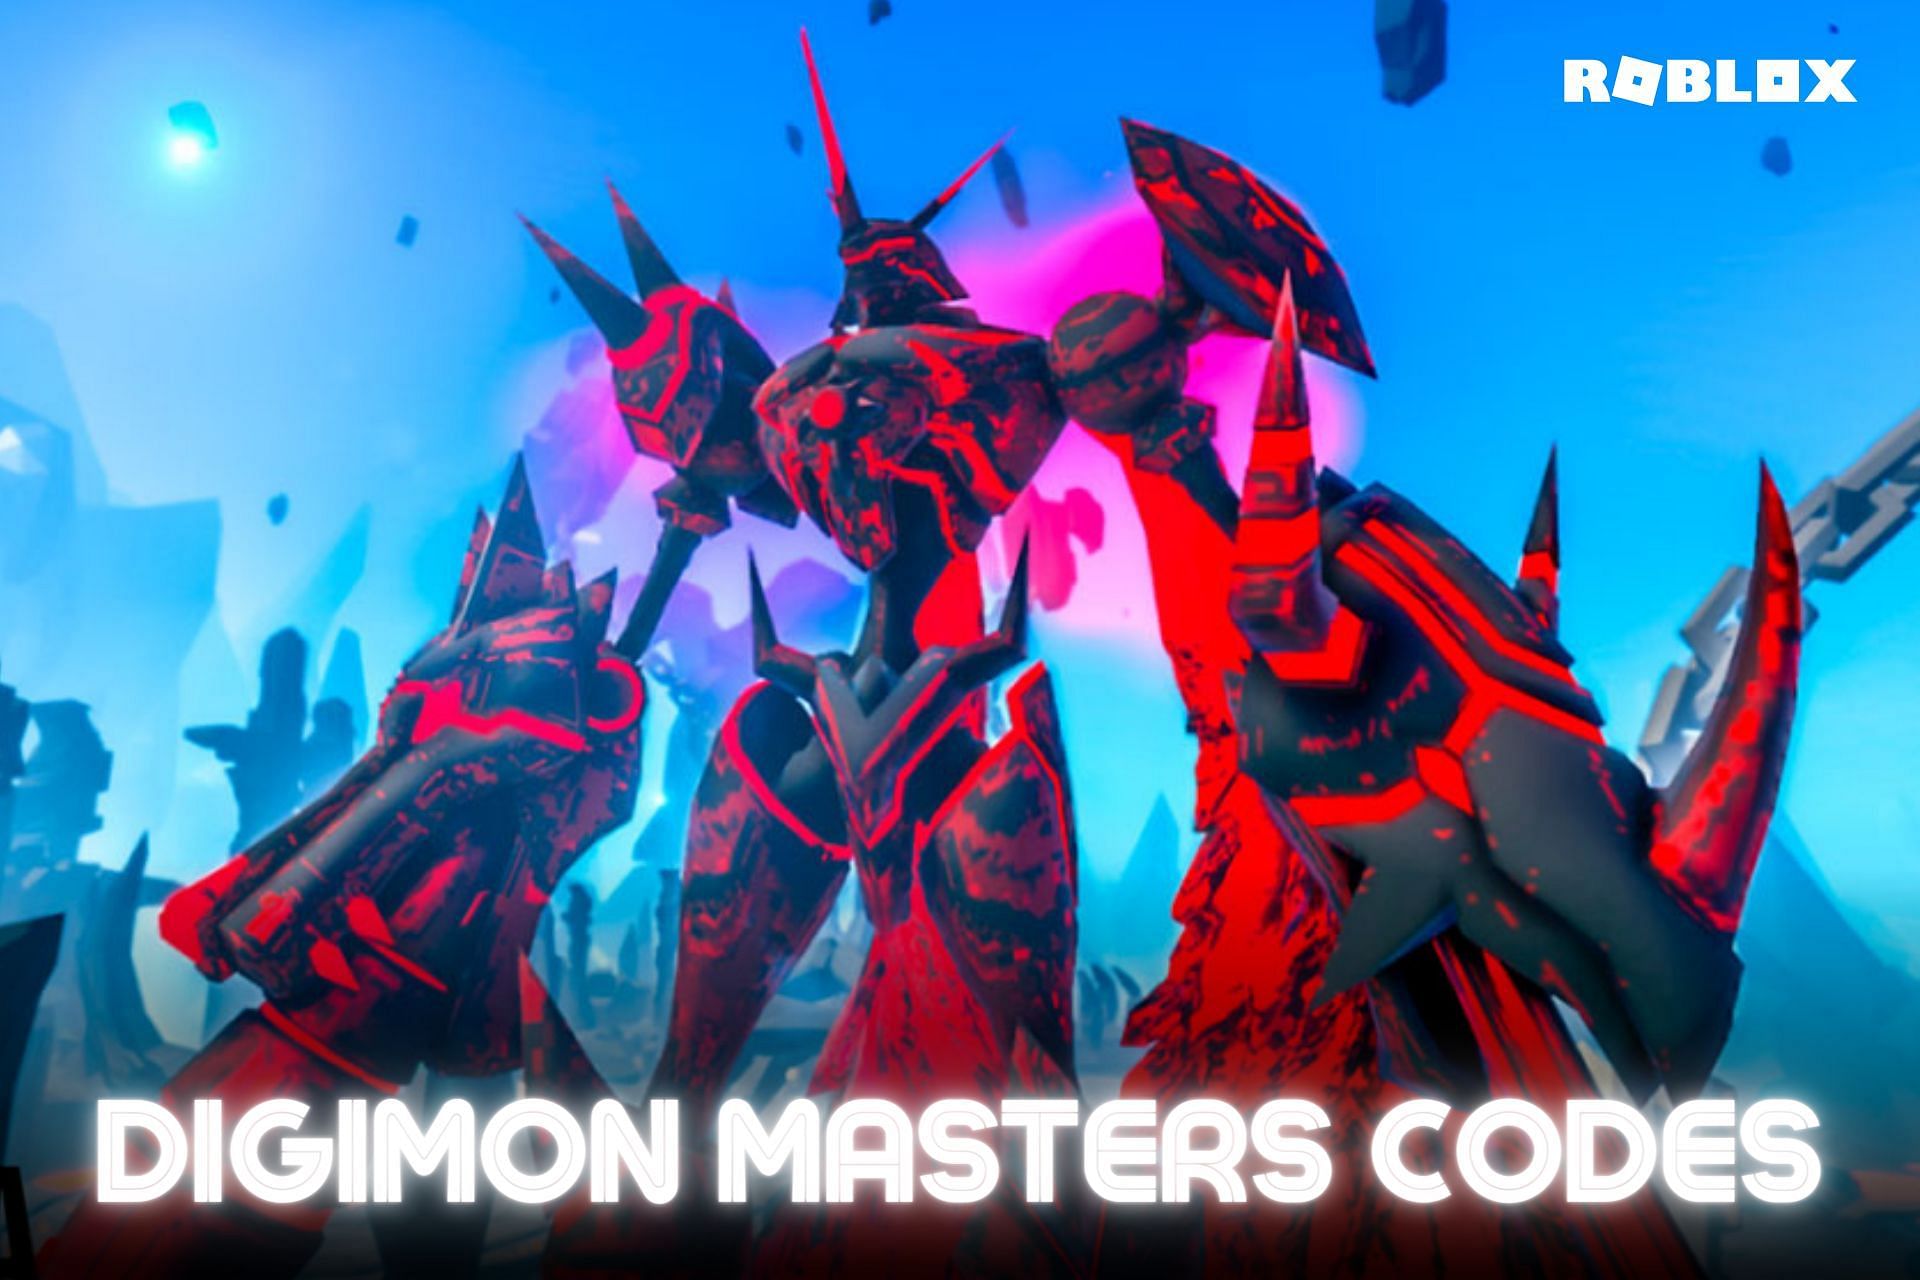 Roblox Digimon Masters : Re-living your Childhood Fantasies (Image via Roblox)